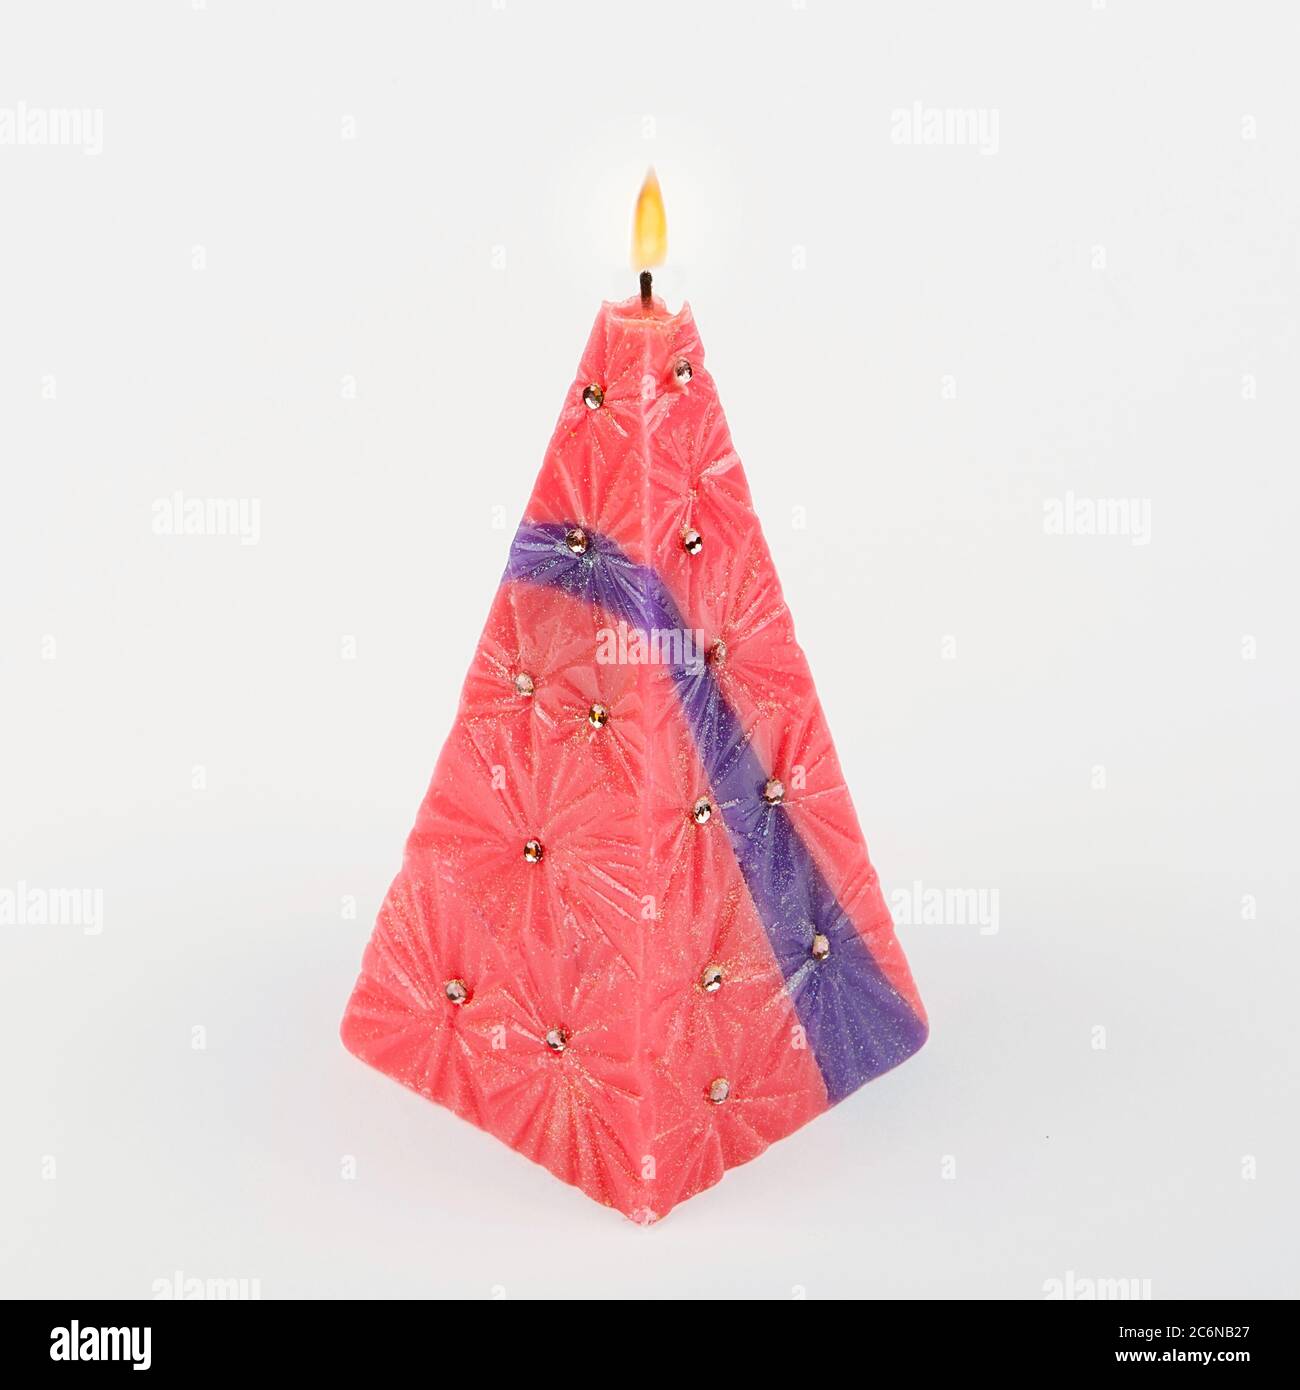 Decorative Handmade candle in the shape of a pyramid on white background Stock Photo